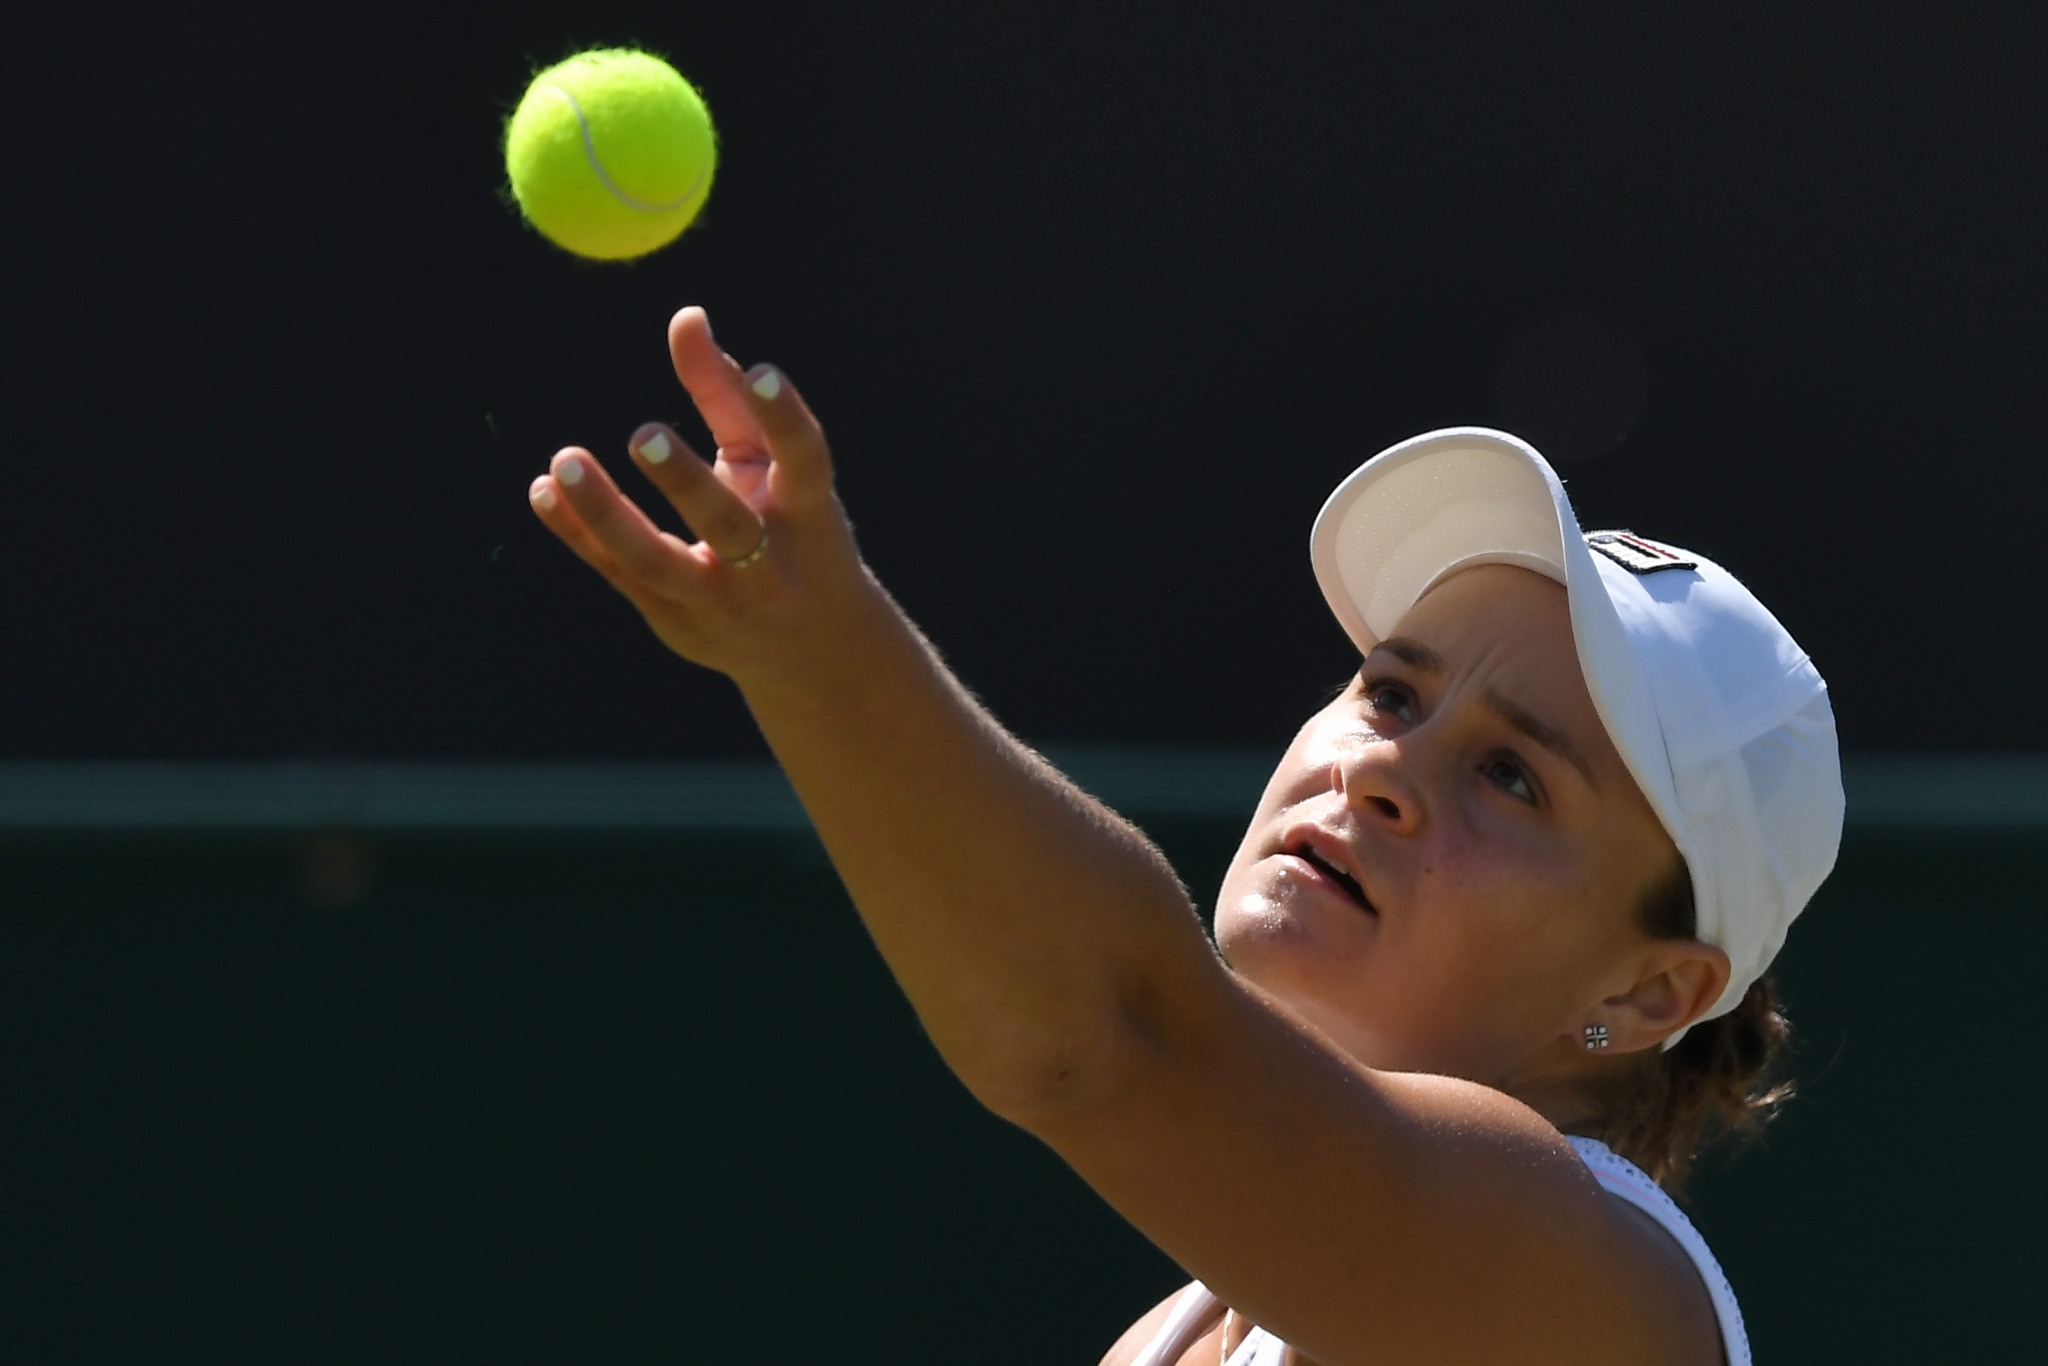 World number one Ashleigh Barty eased into the third round with victory over Belgium's Alison van Uytvanck ©Getty Images